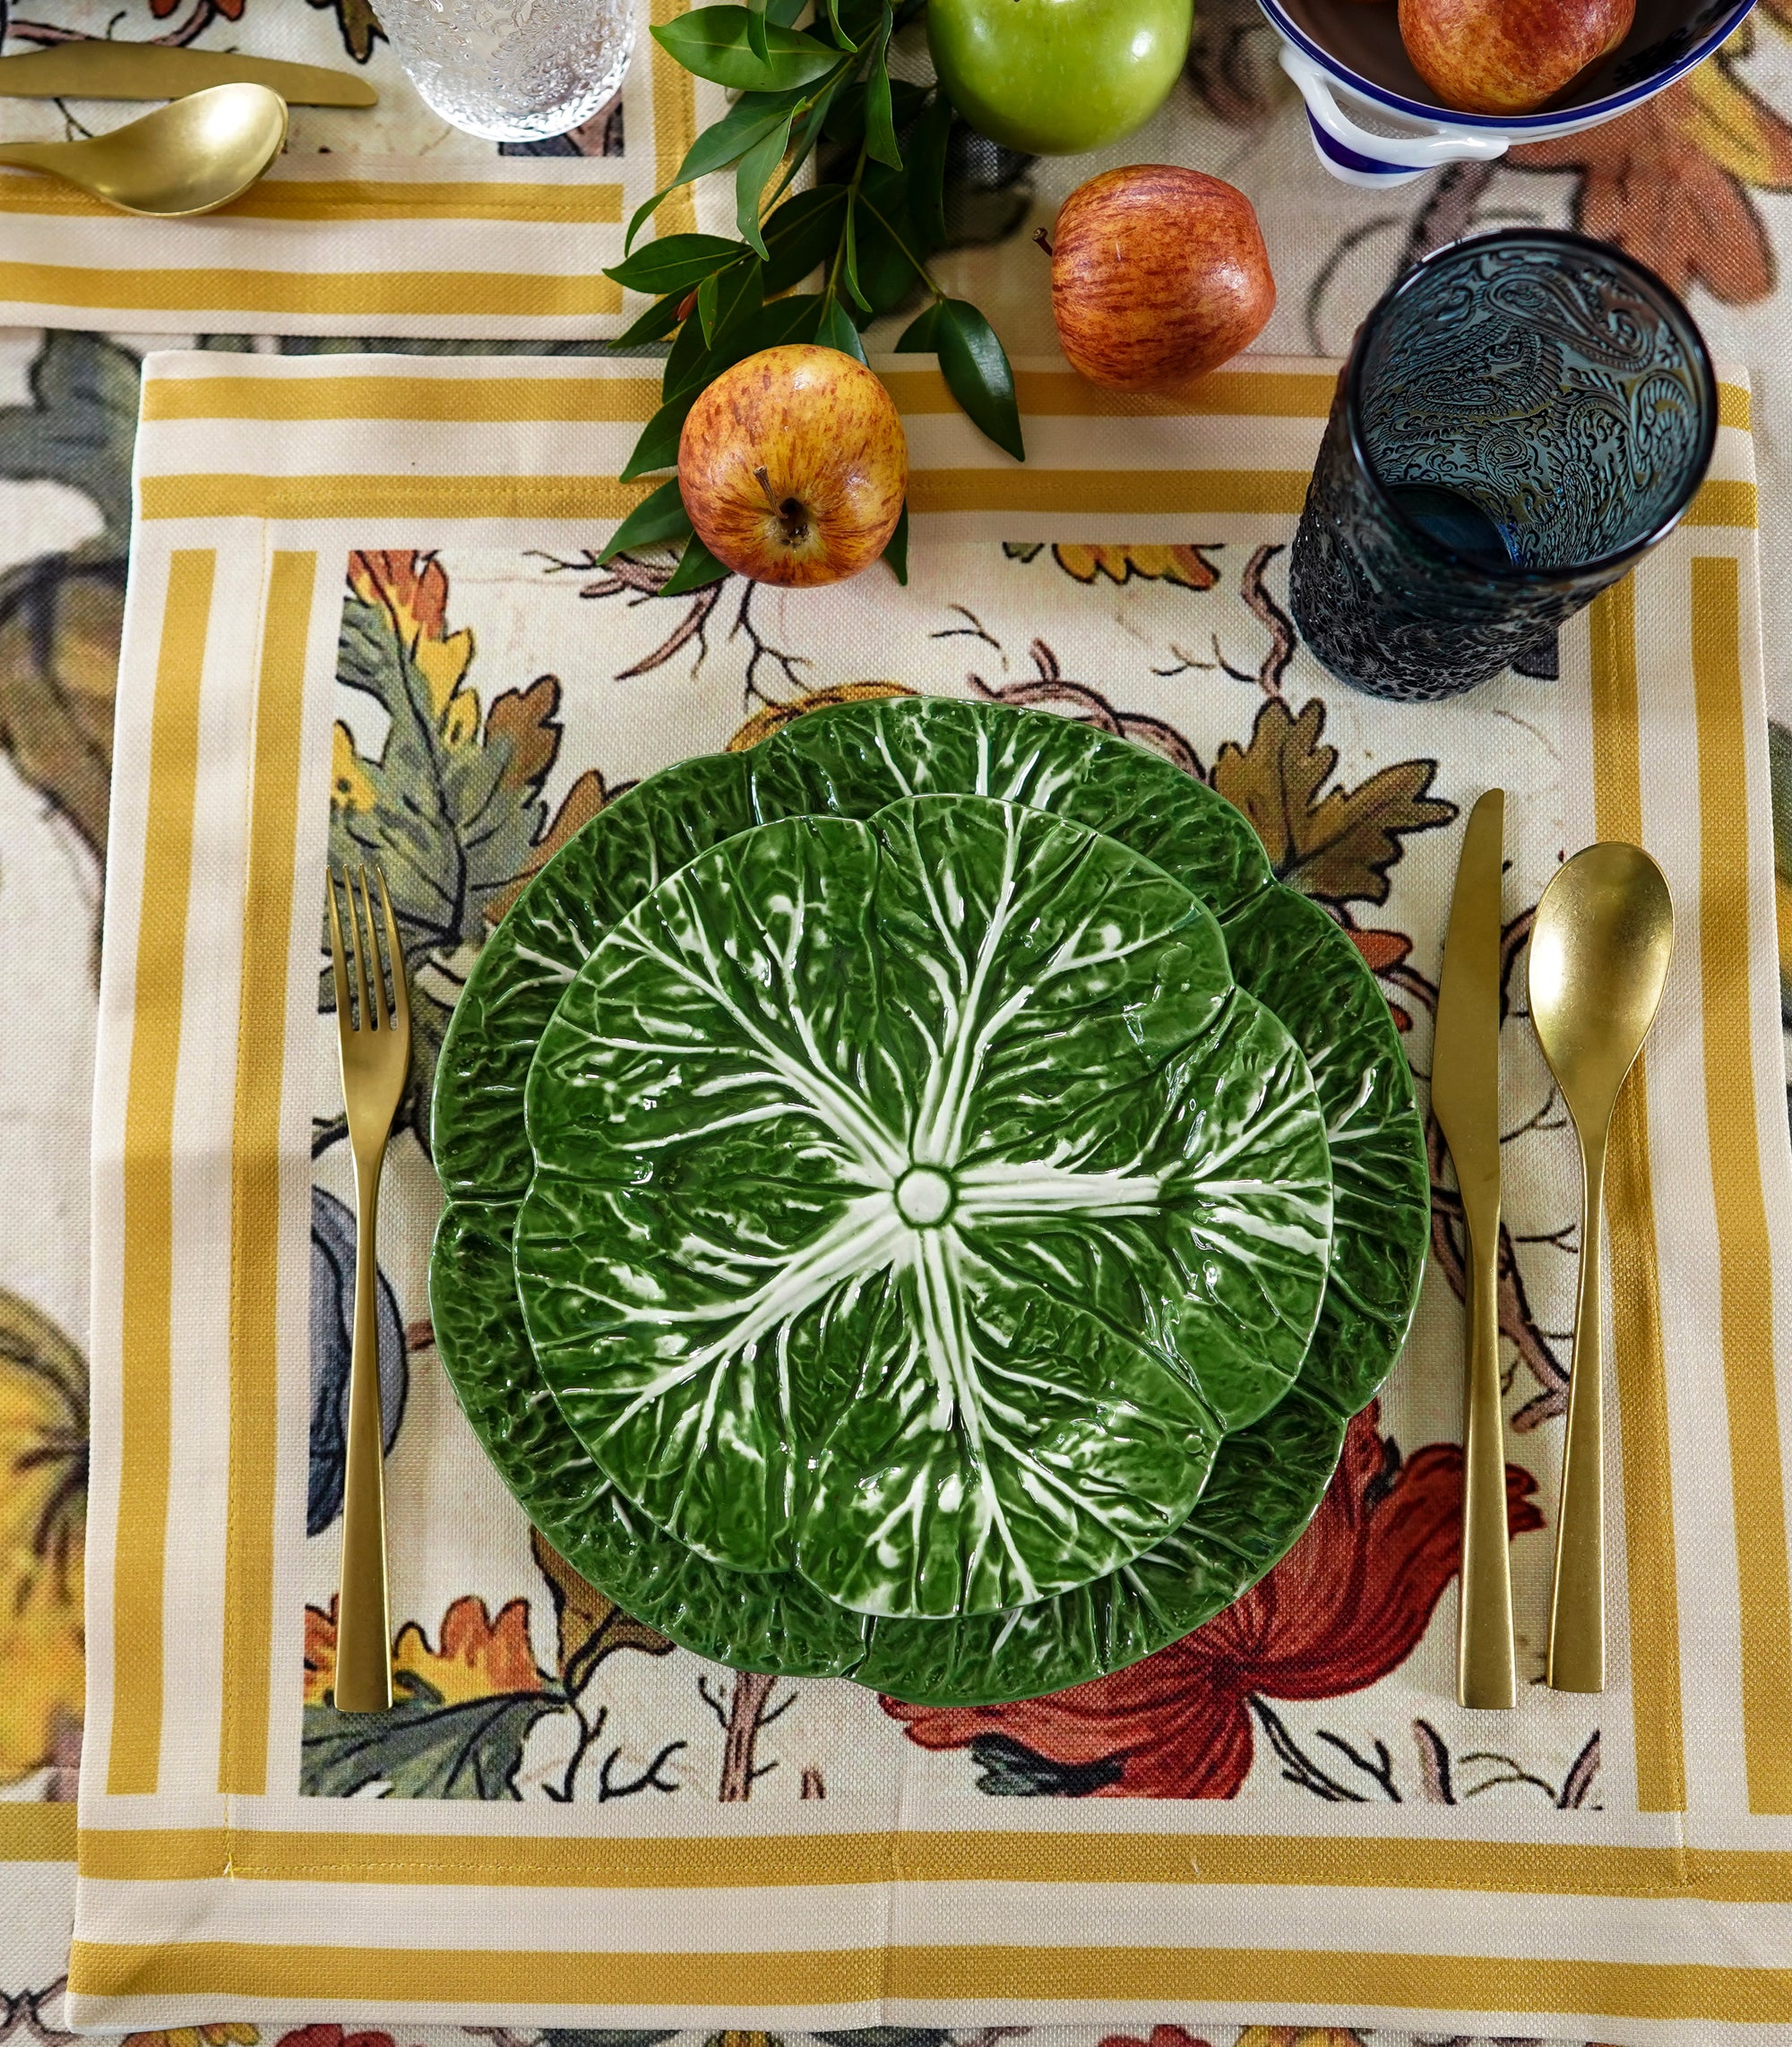 Slovenia Dinner and Salad Plate Set of 2    Green